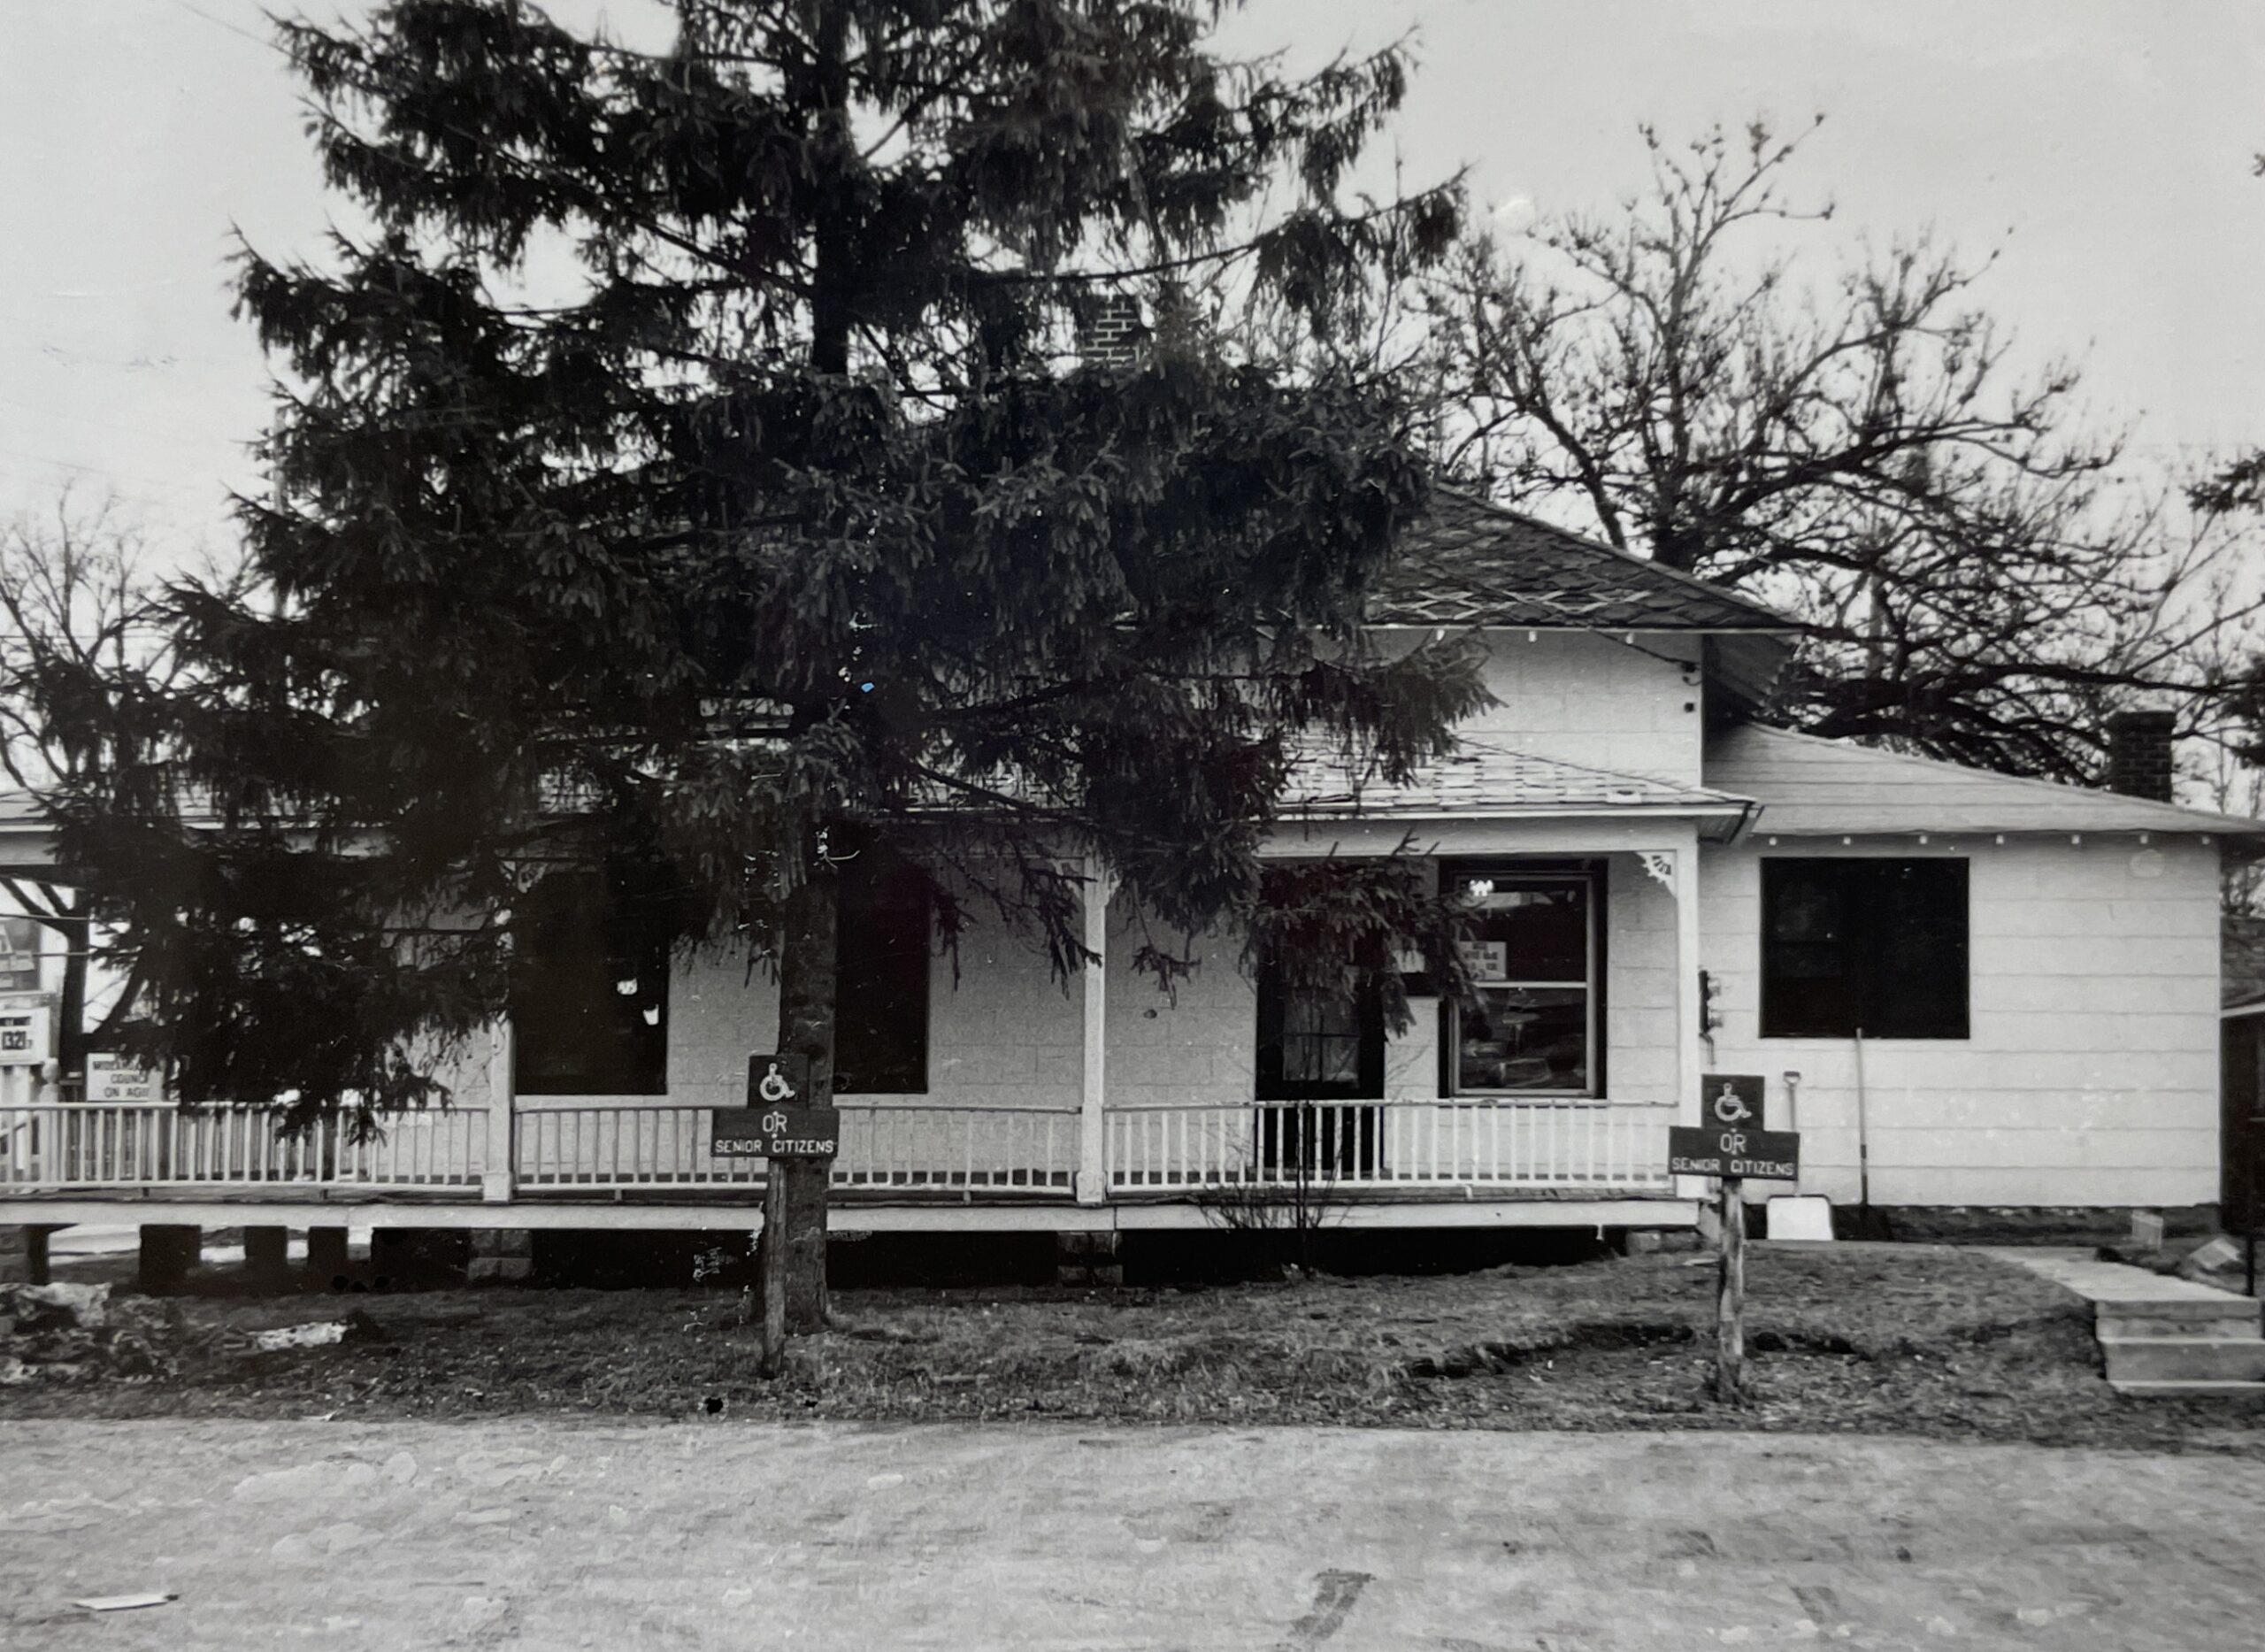 MCCA’s first office was opened in November of 1974 in a duplex at 416 Mill Street. 